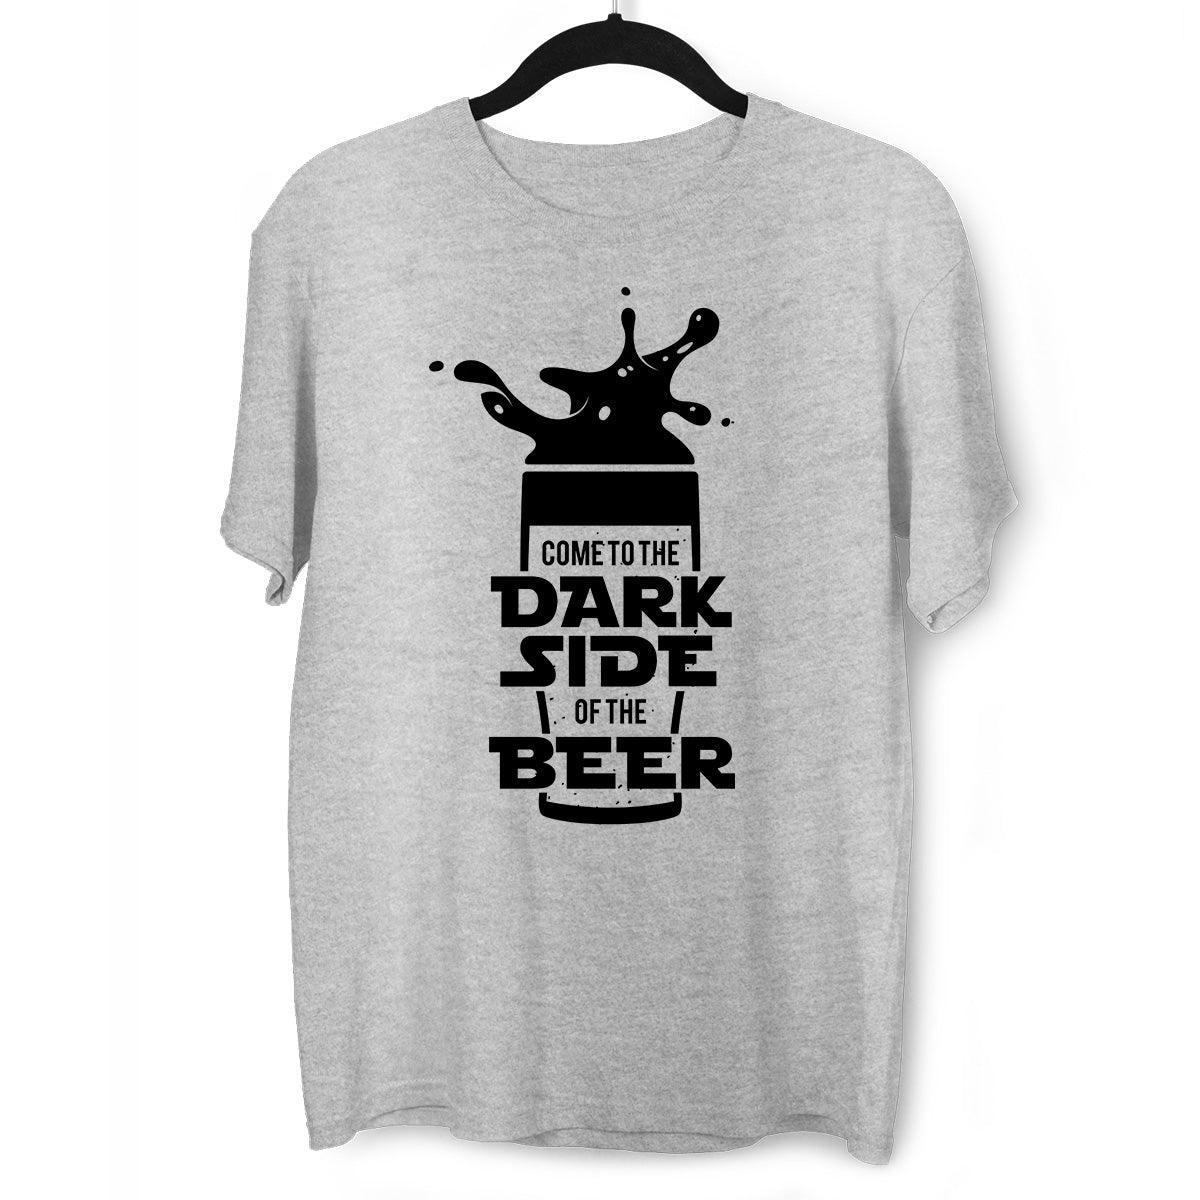 Come to the dark side of the Funny Geek Star Wars T-Shirt - Kuzi Tees